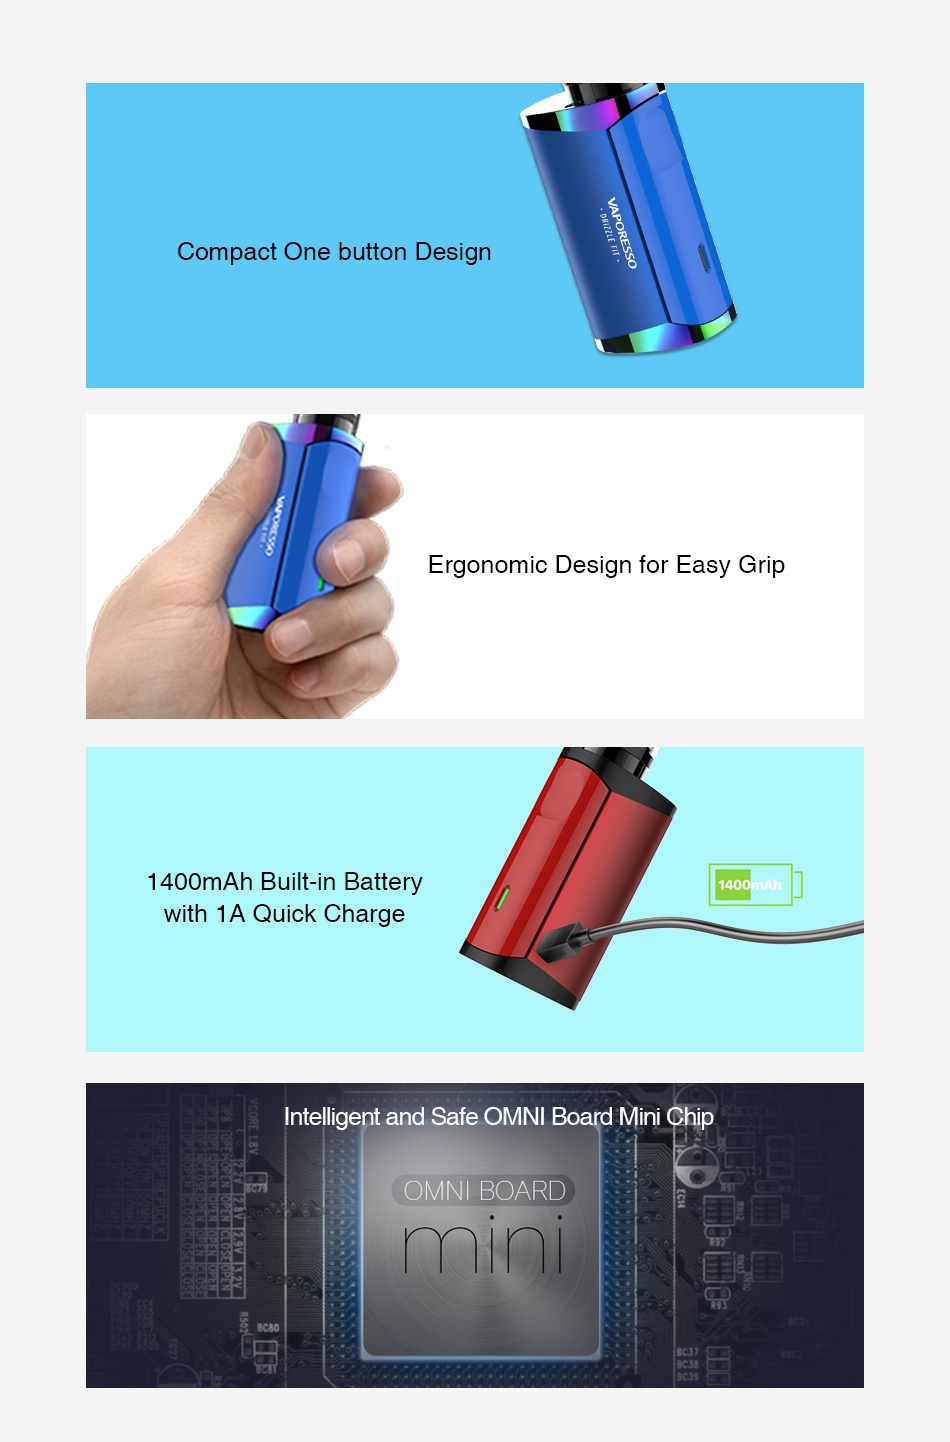 Vaporesso Drizzle Fit Battery 1400mAh Compact One button Design Ergonomic Design for Easy Grip 400mAh Built in Battery 1400m ith 1A Quick Charge Intelligent and Safe OMNI Board Mini chip  MN  BOARL